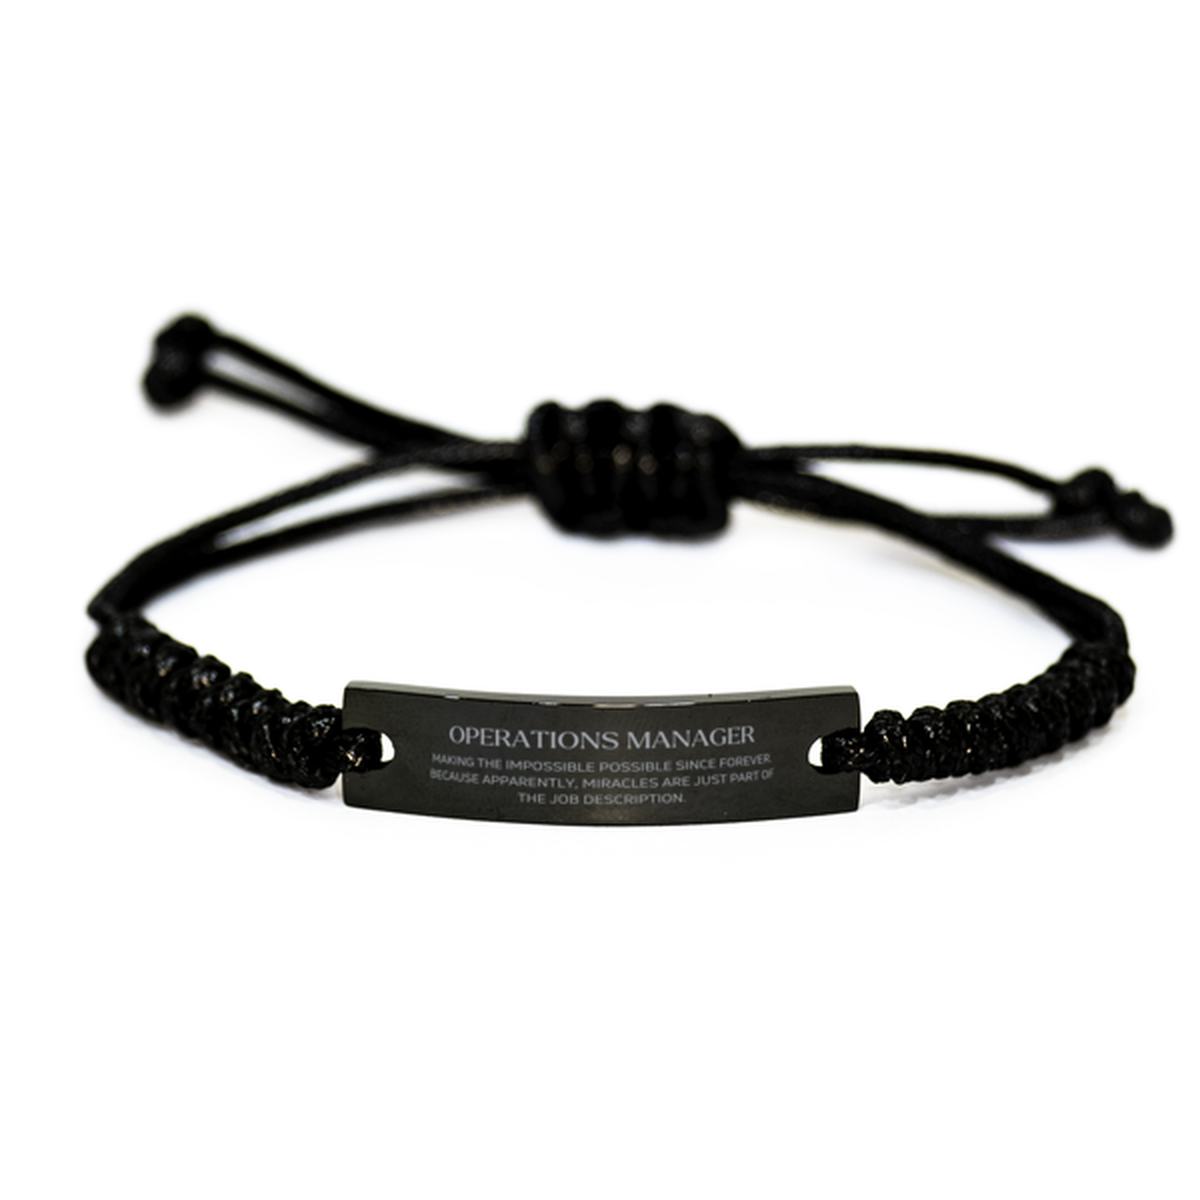 Funny Operations Manager Gifts, Miracles are just part of the job description, Inspirational Birthday Black Rope Bracelet For Operations Manager, Men, Women, Coworkers, Friends, Boss